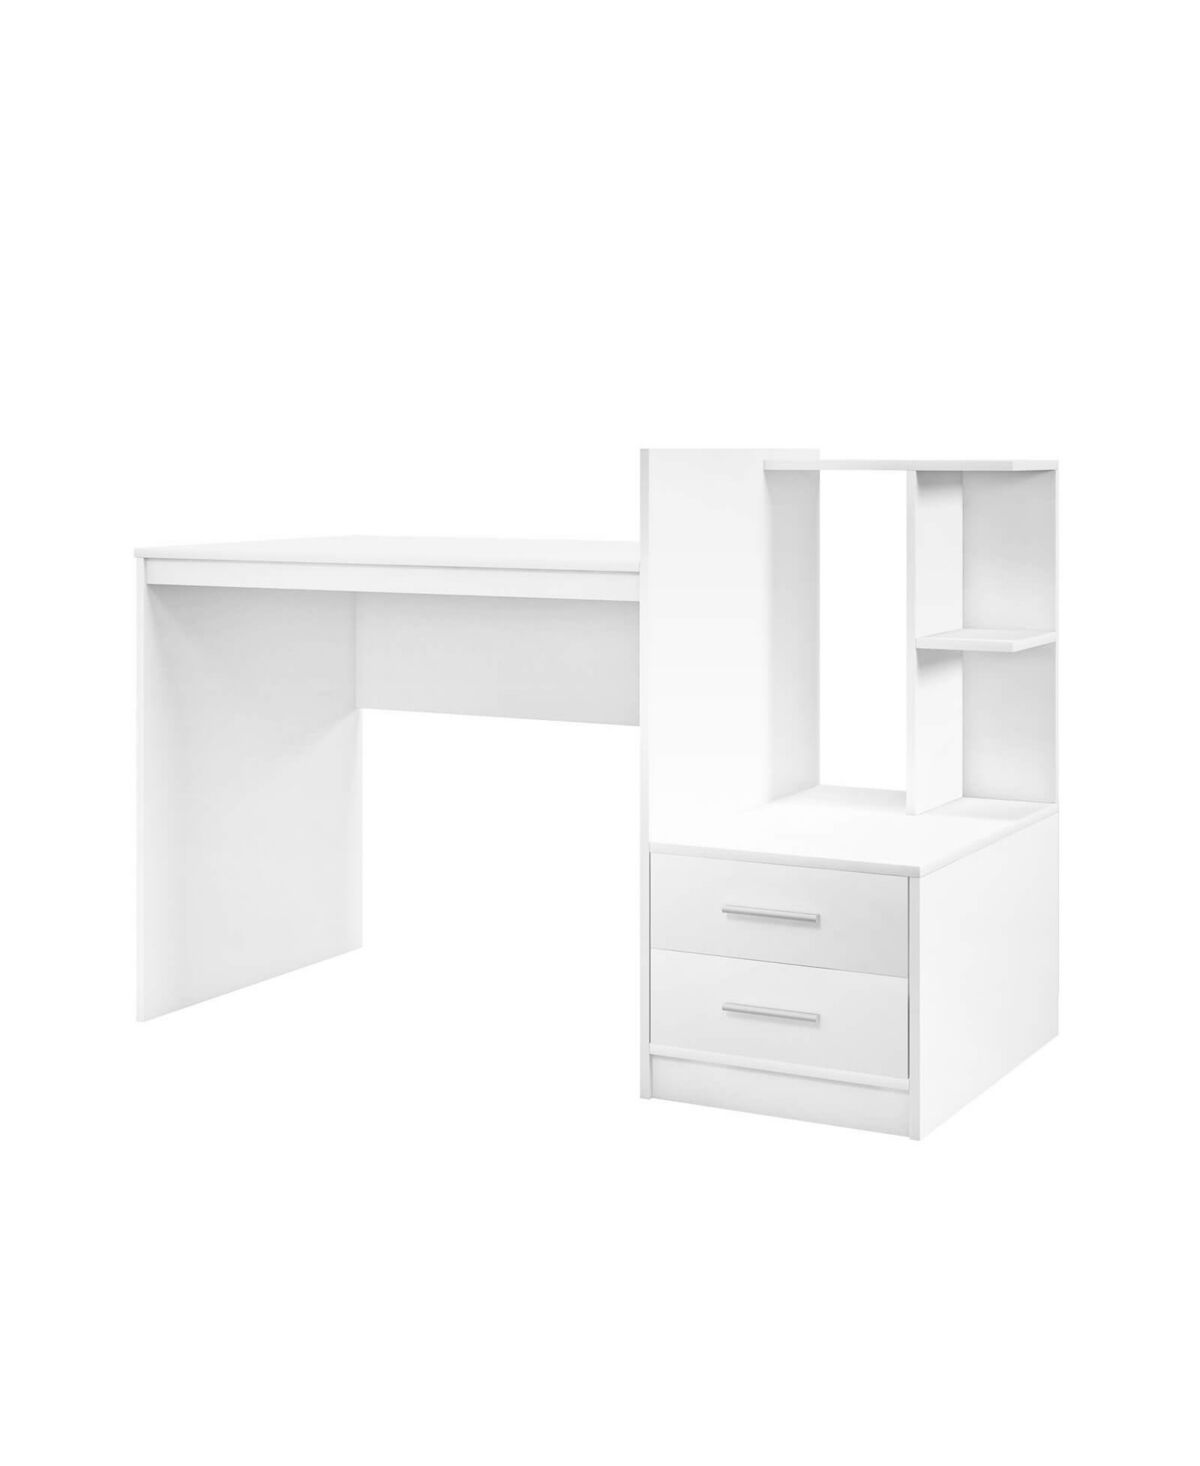 Slickblue Computer Desk Home Office with Bookshelf and Drawers-White - White